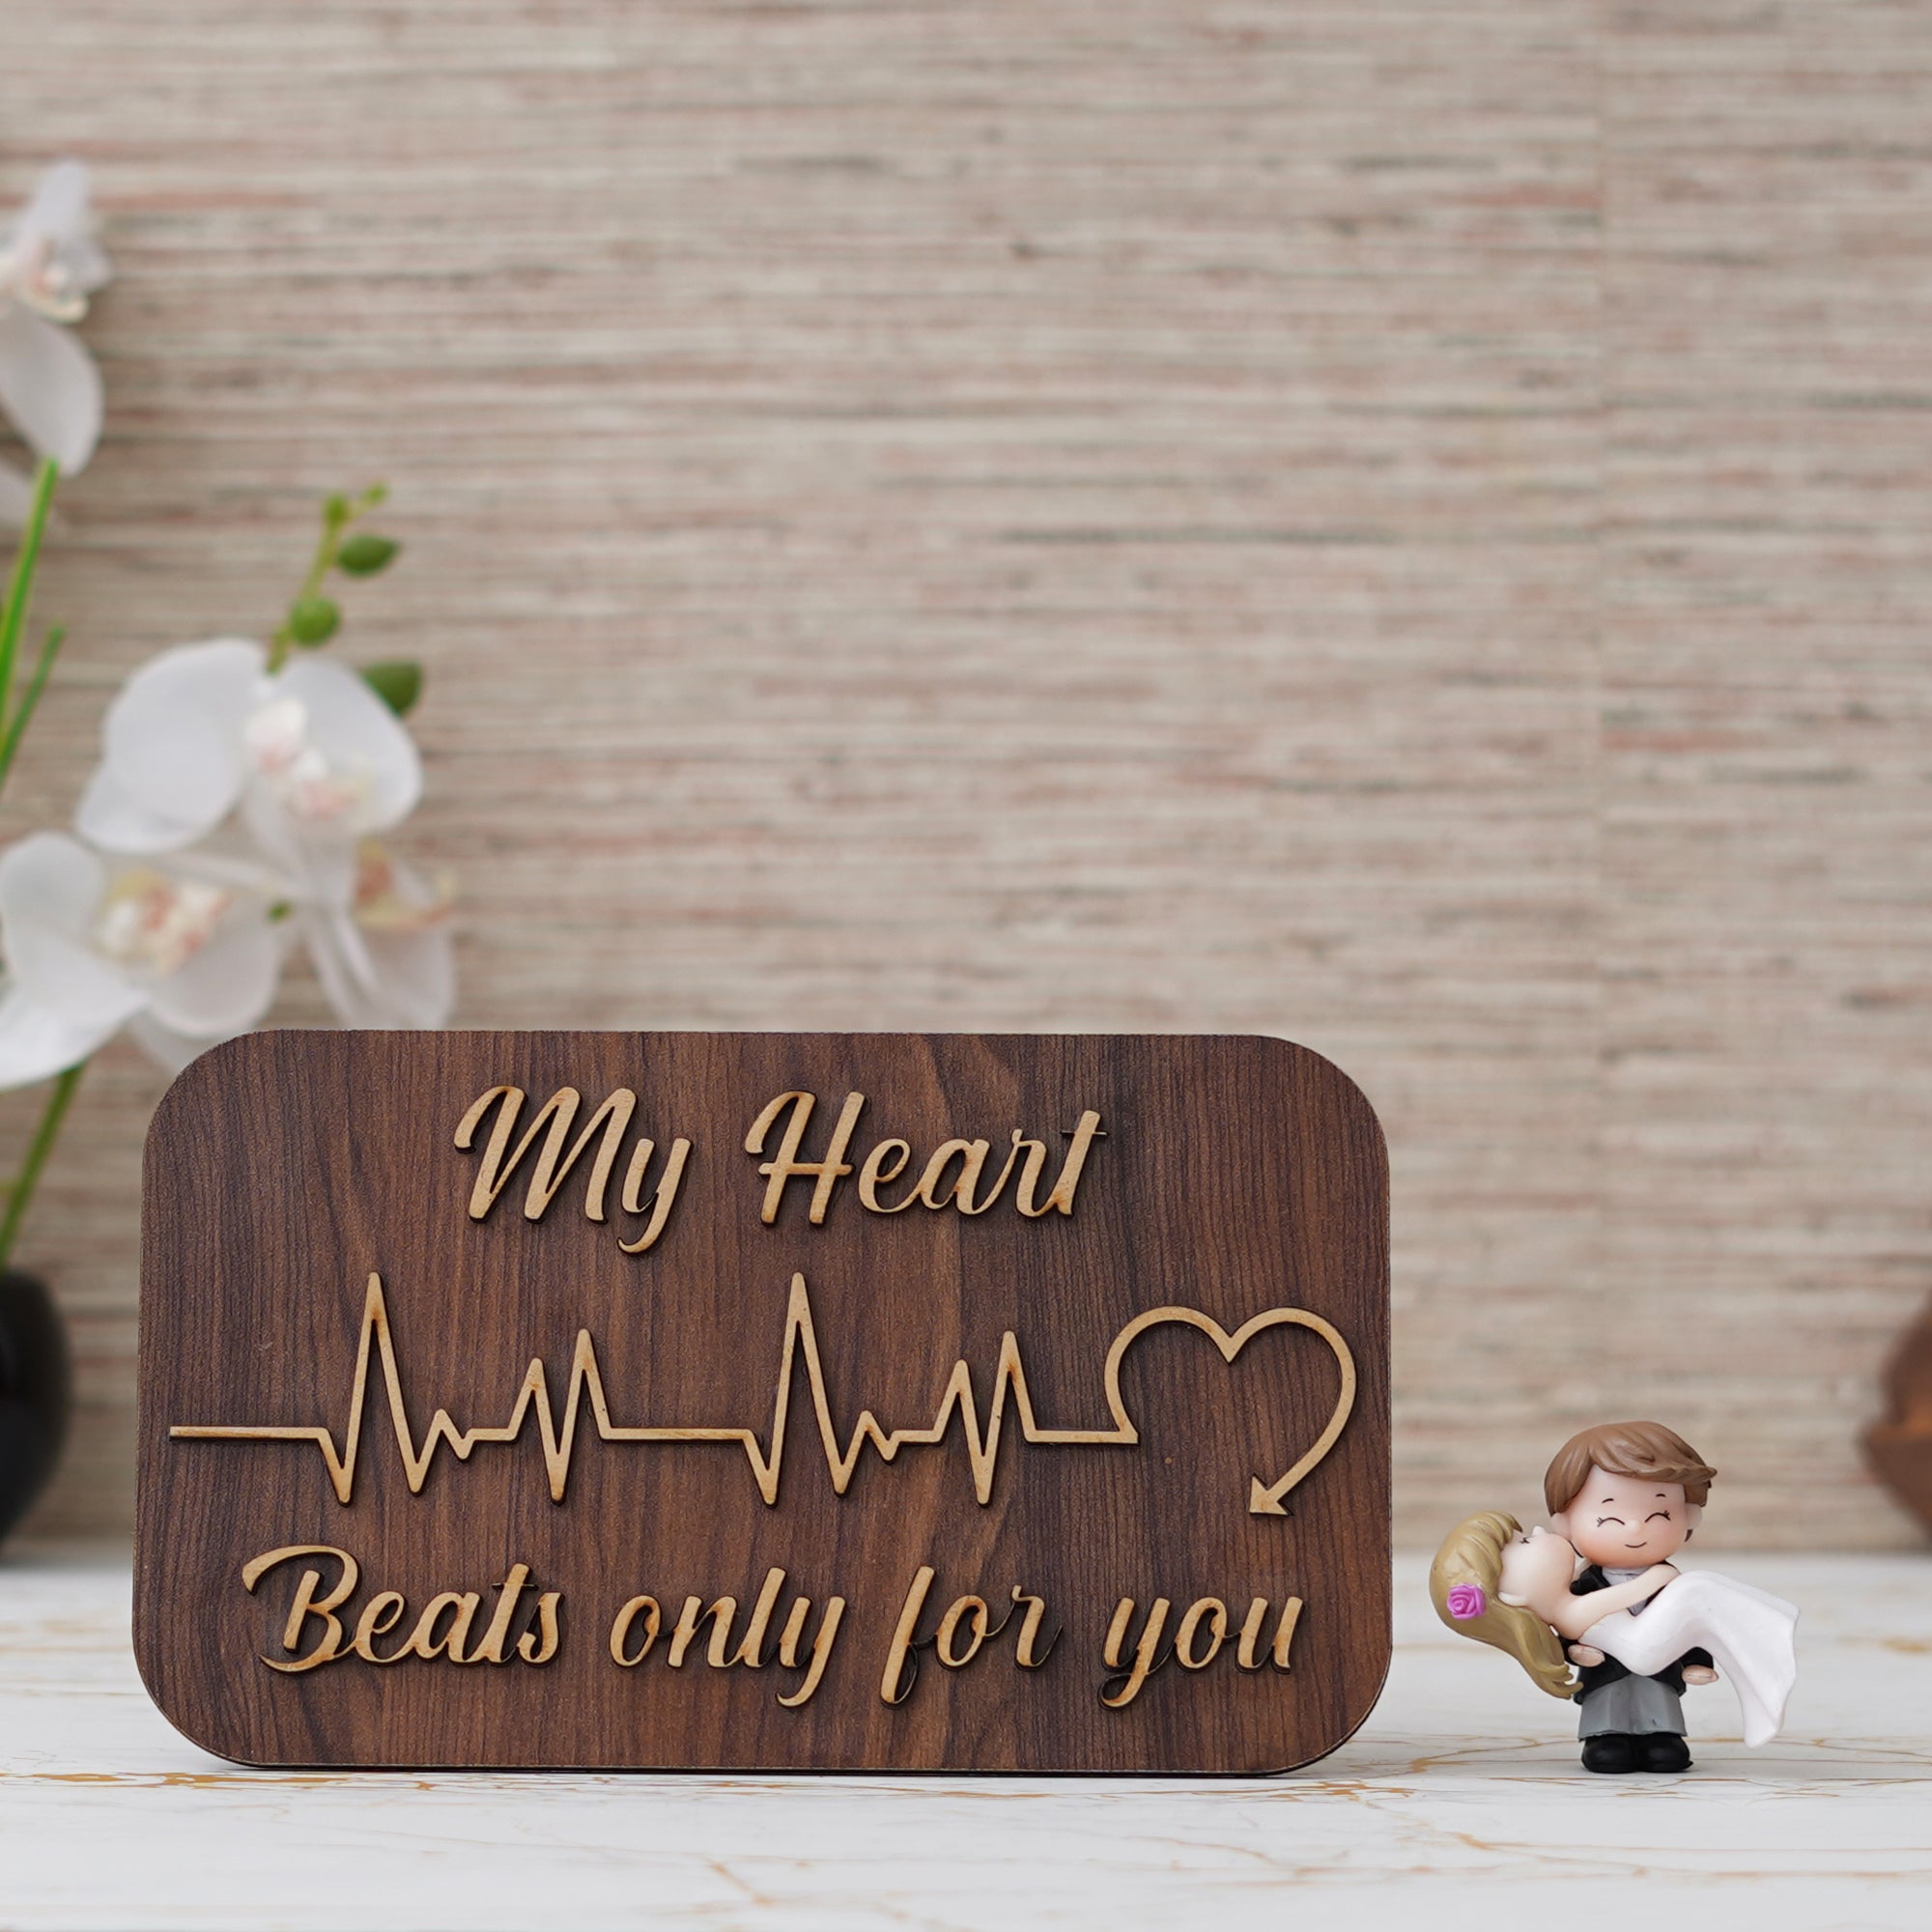 Valentine Combo of "My Heart Beats Only For You" Wooden Showpiece With Stand, Bride Kissing Groom Romantic Polyresin Decorative Showpiece